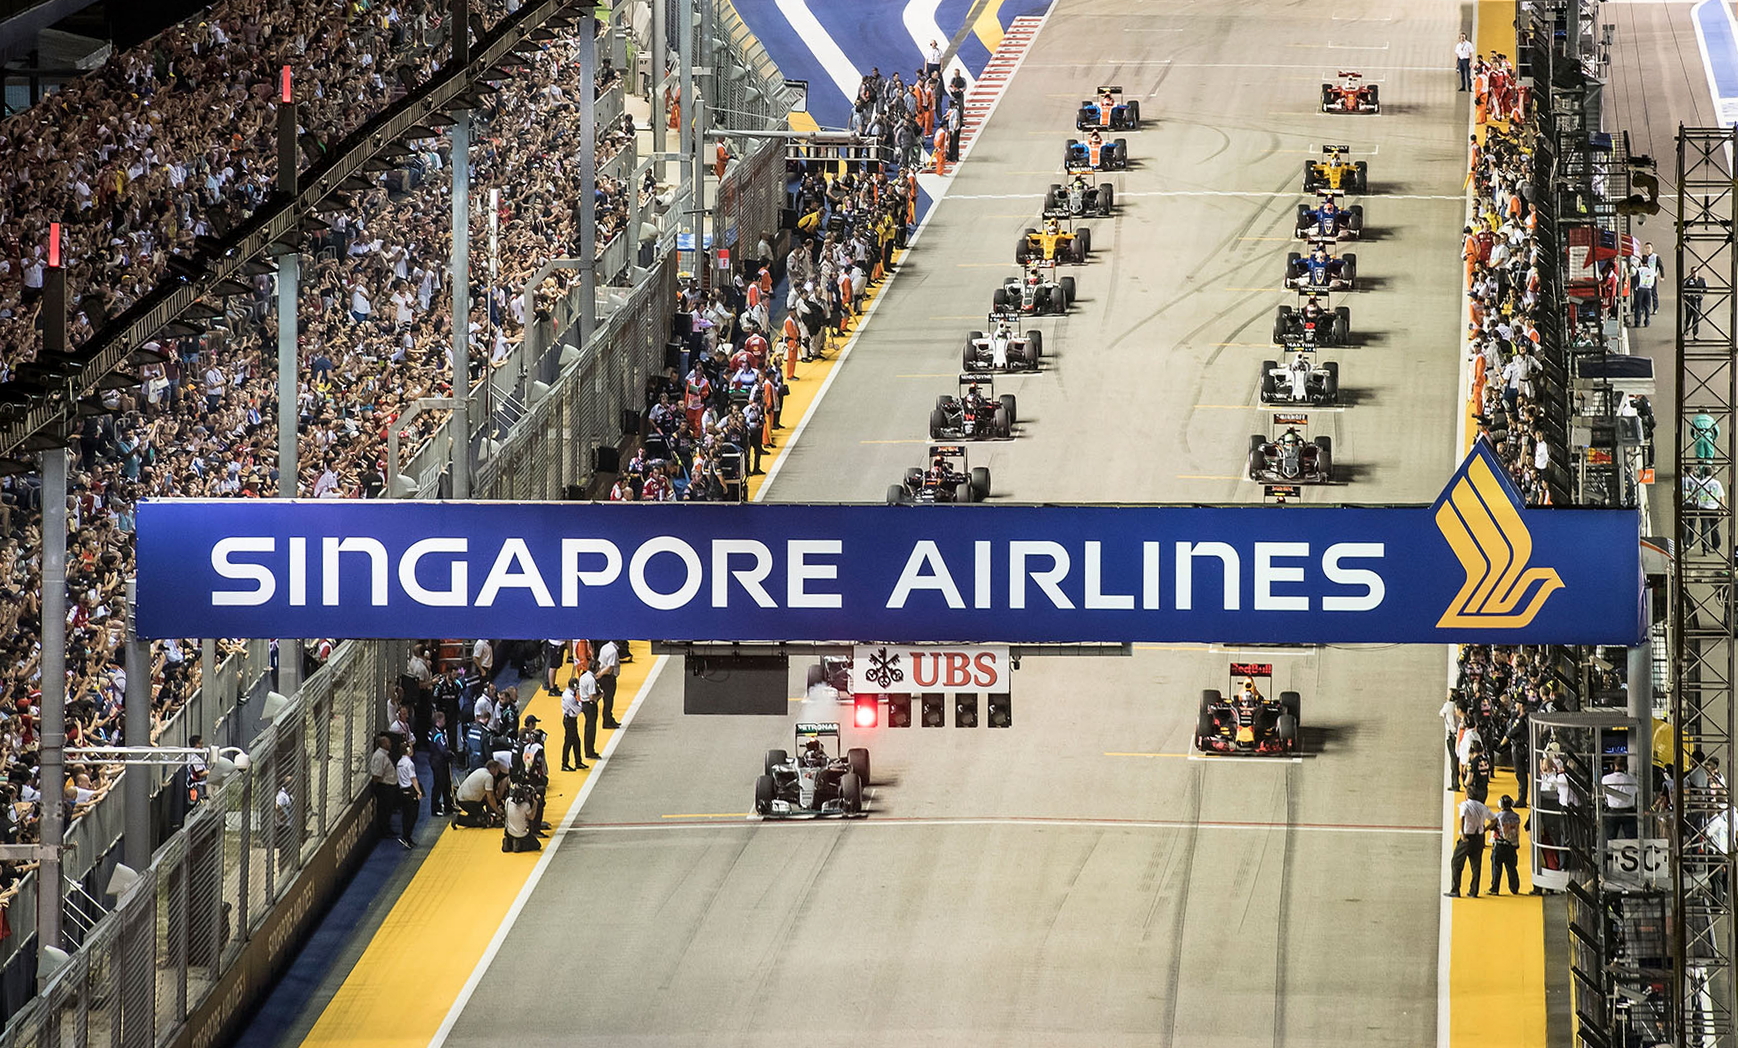 Singapore Airlines has confirmed that it will extend its title sponsorship of the Formula 1 Singapore Grand Prix for another two years, until 2019. Click to enlarge.